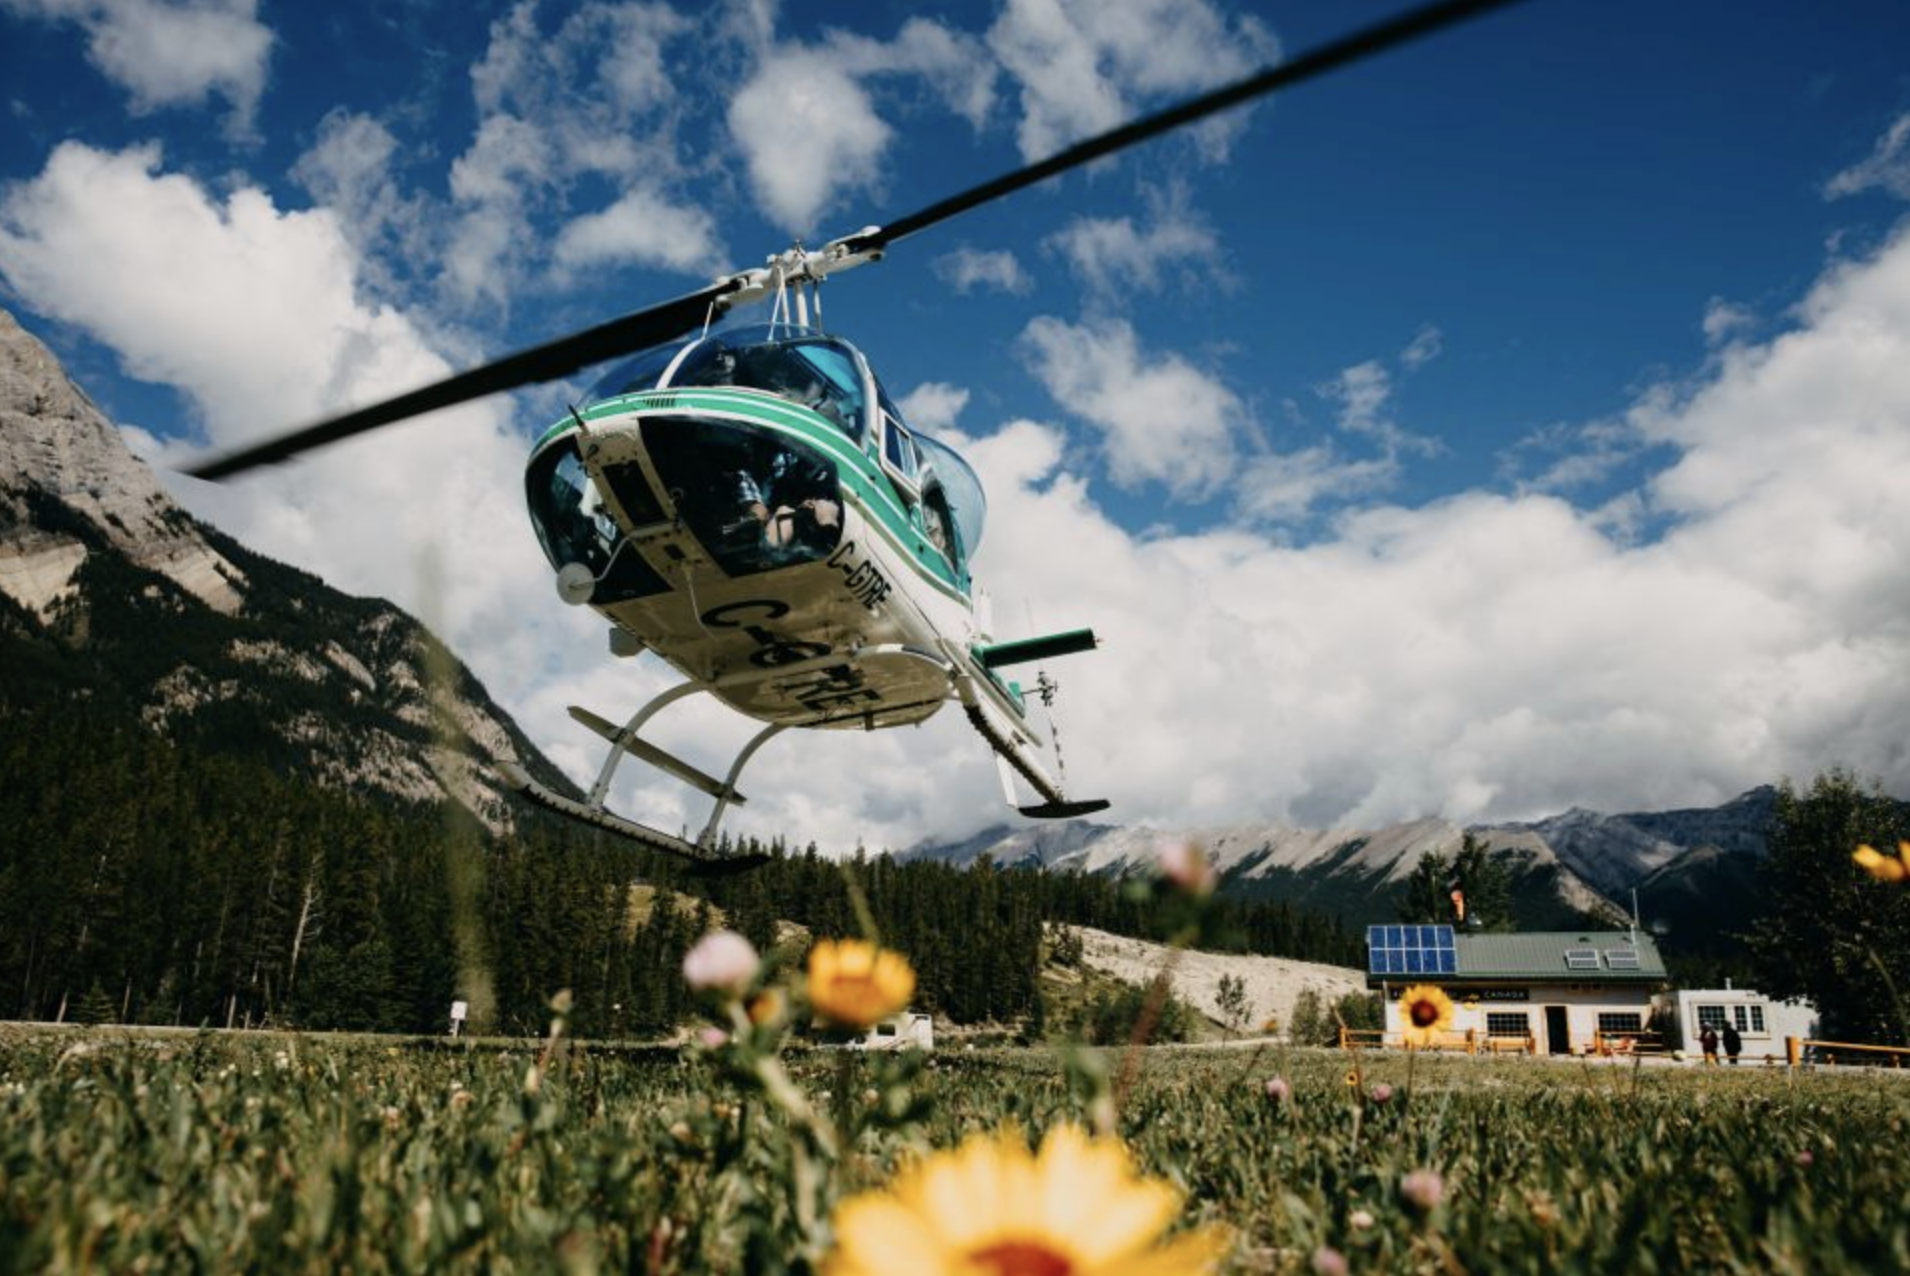 1. Canadian Rockies Scenic Helicopter Tour